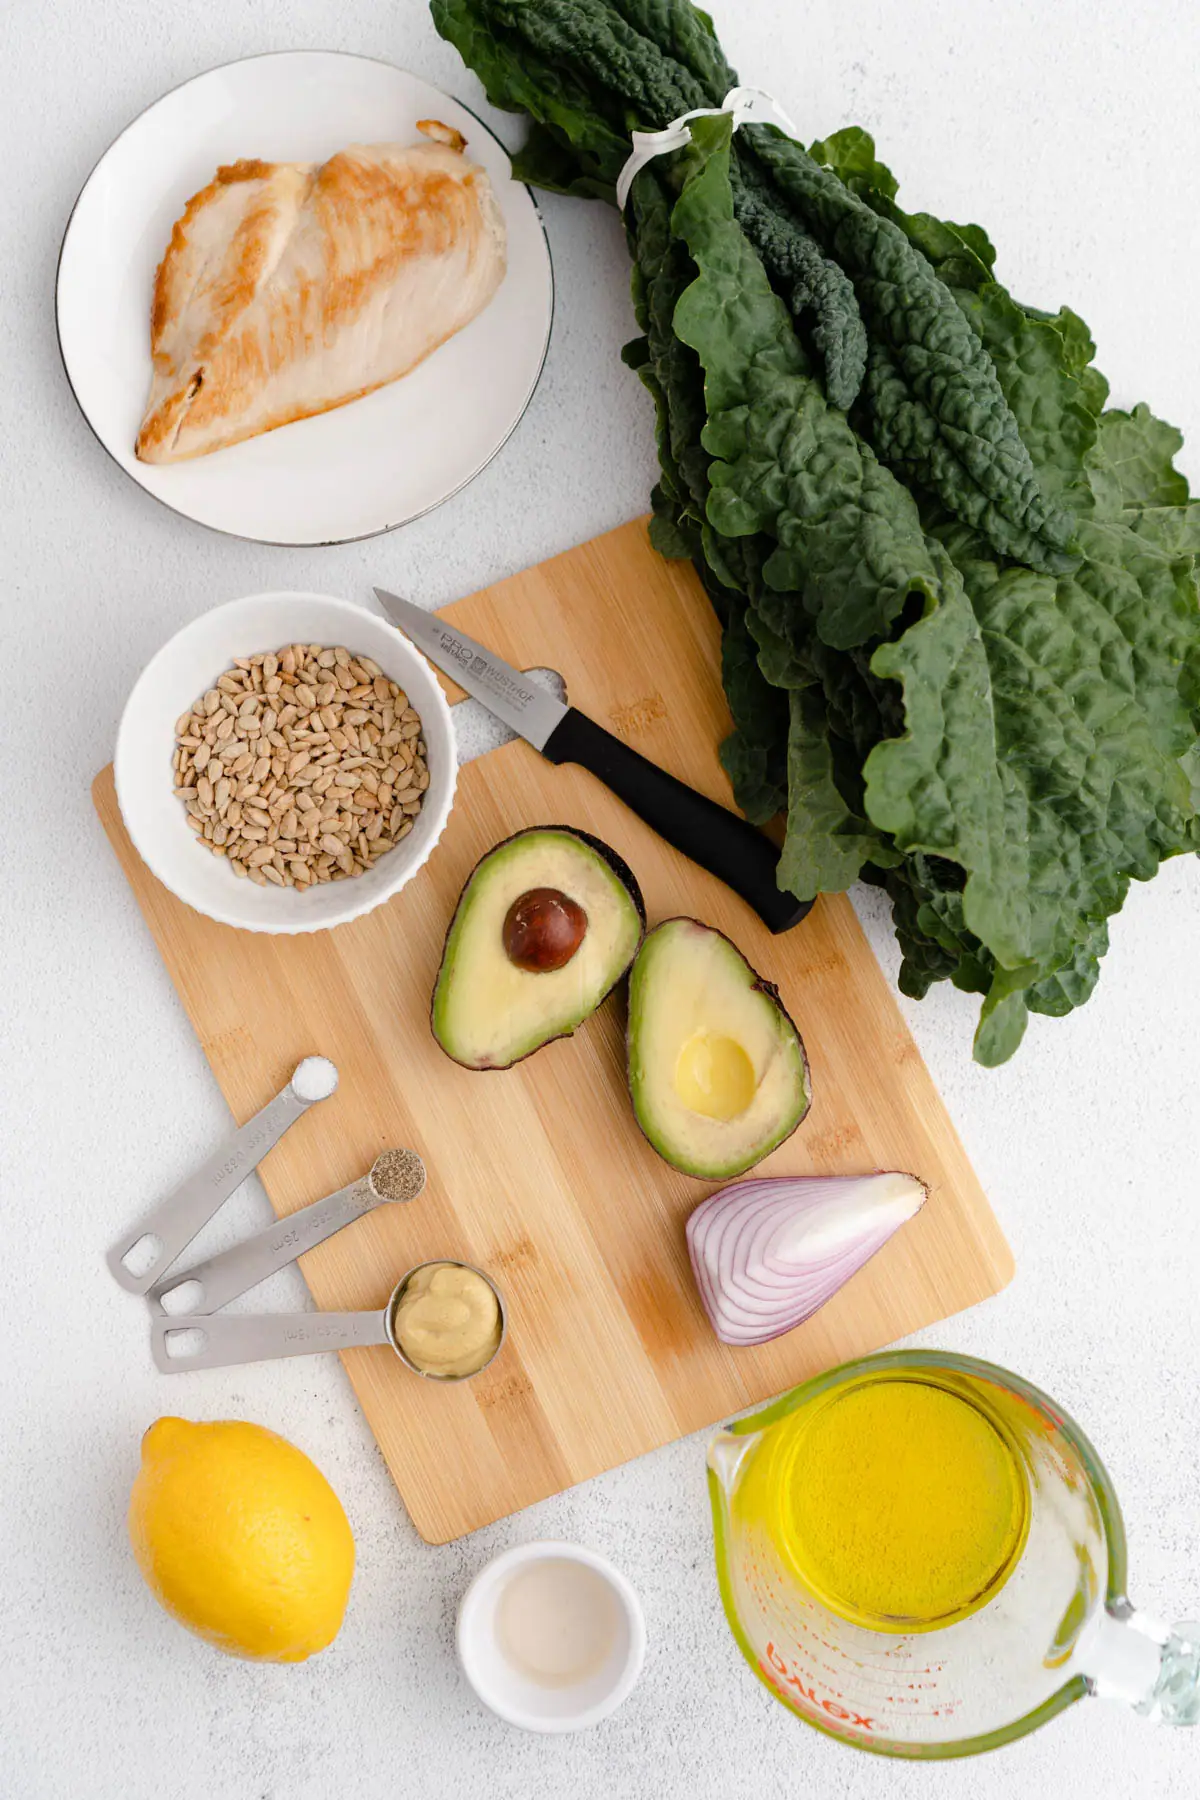 Overhead shot of ingredients used to prepare recipe: kale bunch, chicken breast on plate, olive oil in cup, lemon, cut avocado and red onion. 